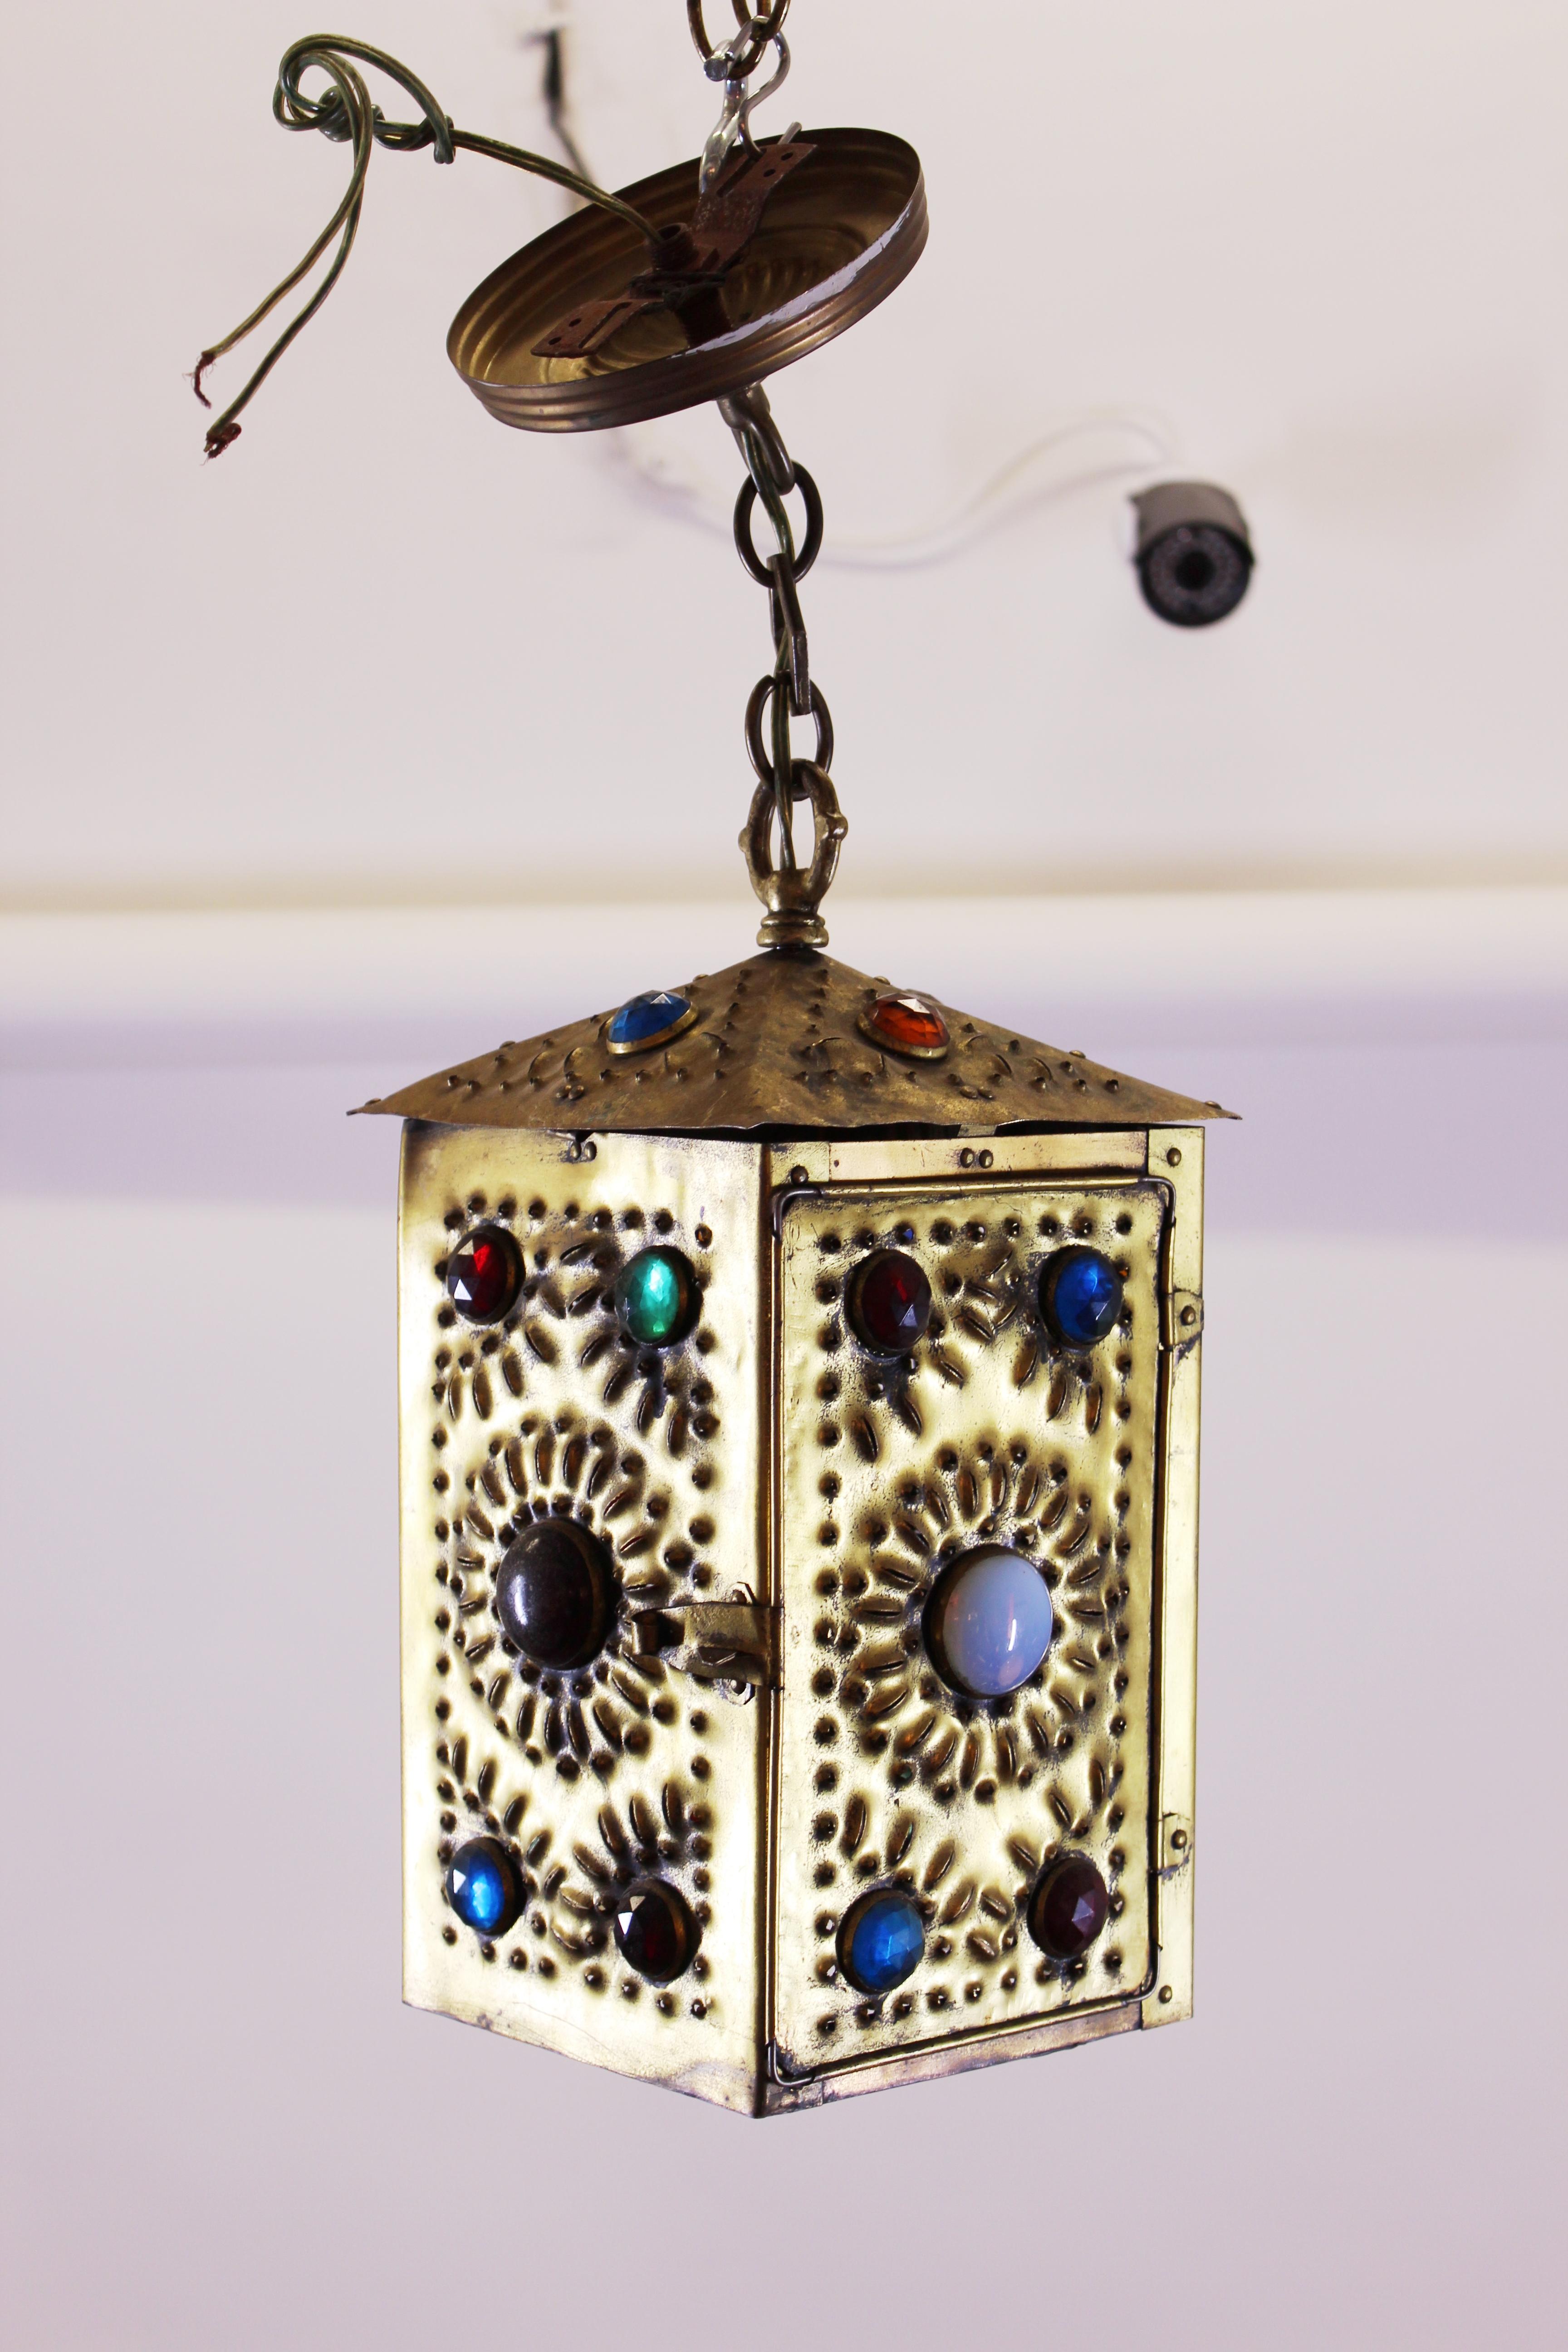 Bradley and Hubbard American Aesthetic Movement handmade lantern in hand-pierced brass with opalescent and faceted glass jewels and a hinged door, open to the bottom, made during the 1880's. In remarkable antique condition with age-appropriate wear.